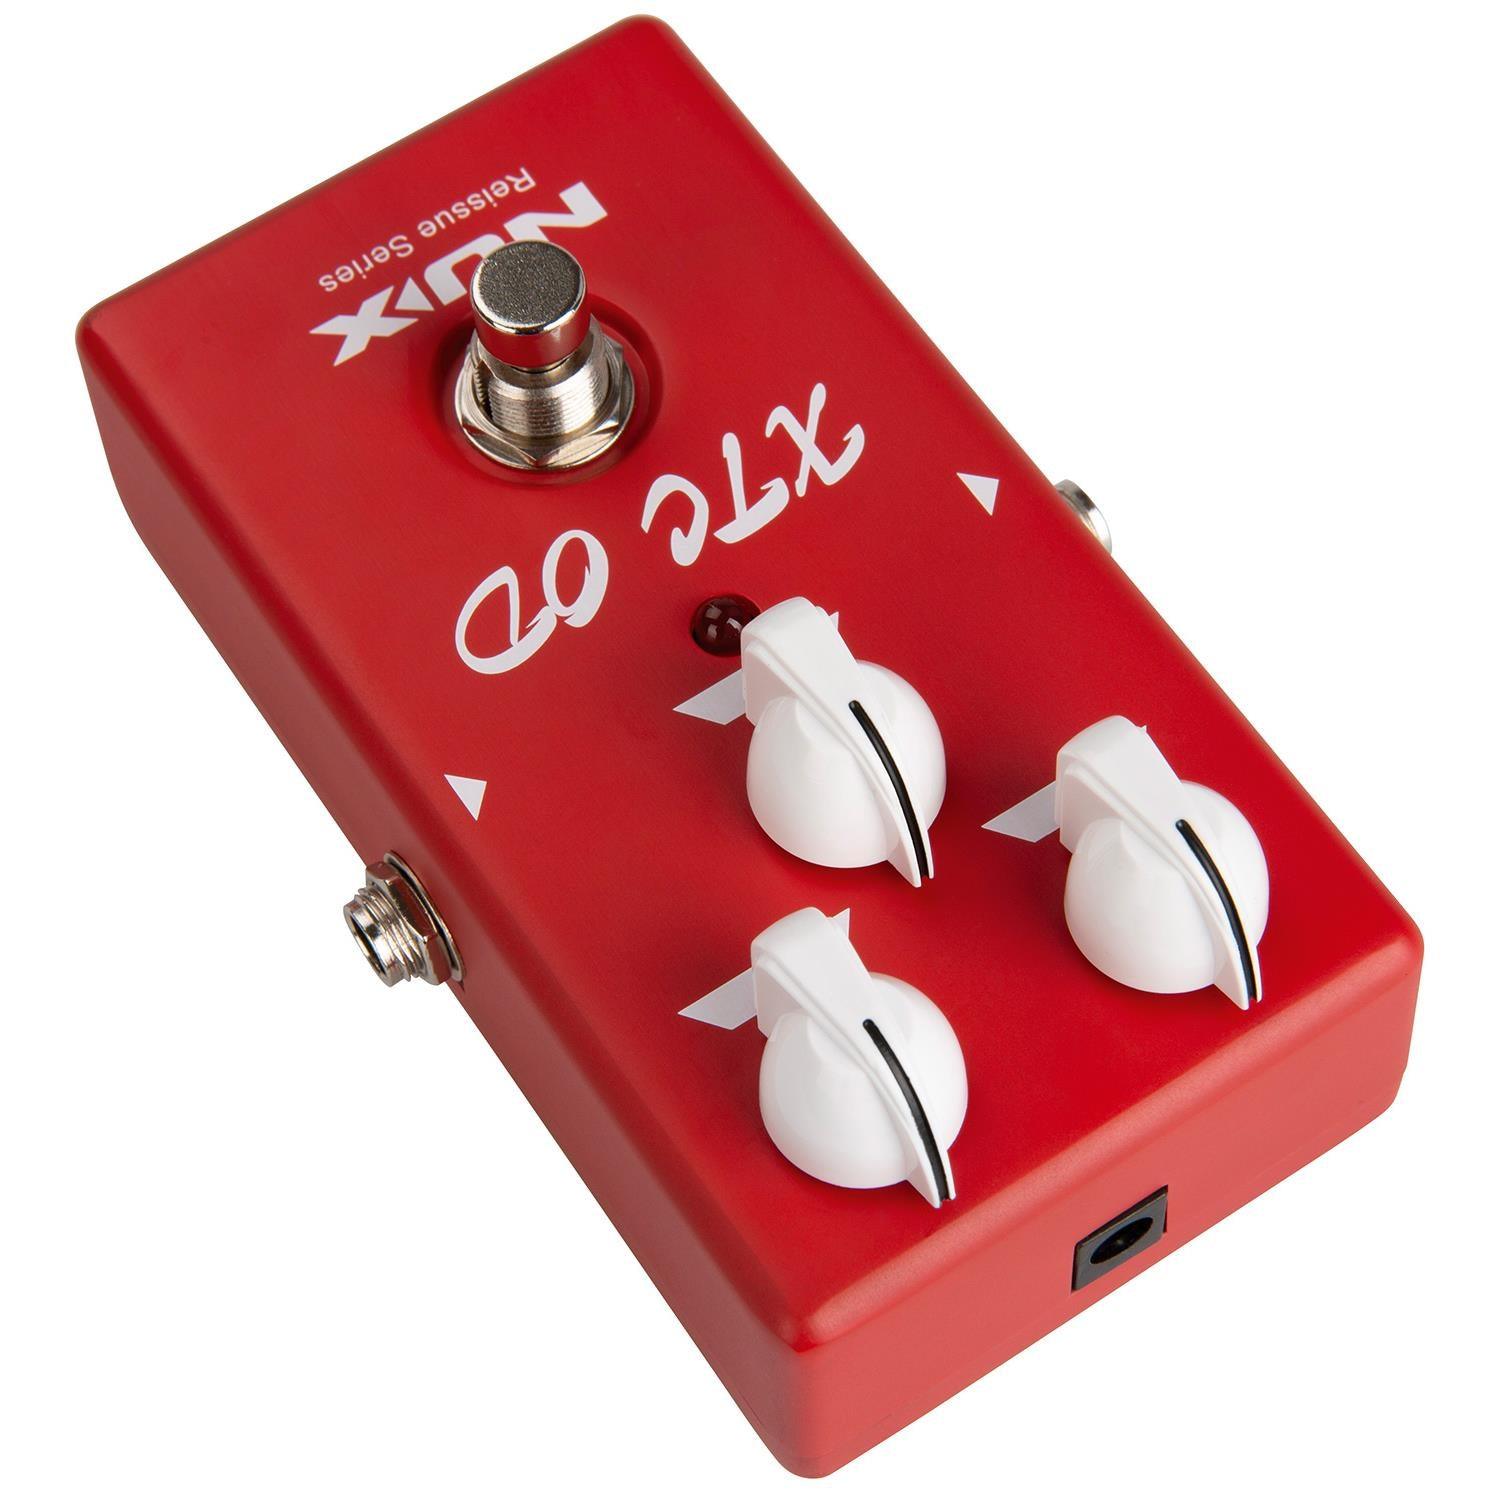 NUX NU-X Reissue XTC Overdrive Pedal - DY Pro Audio